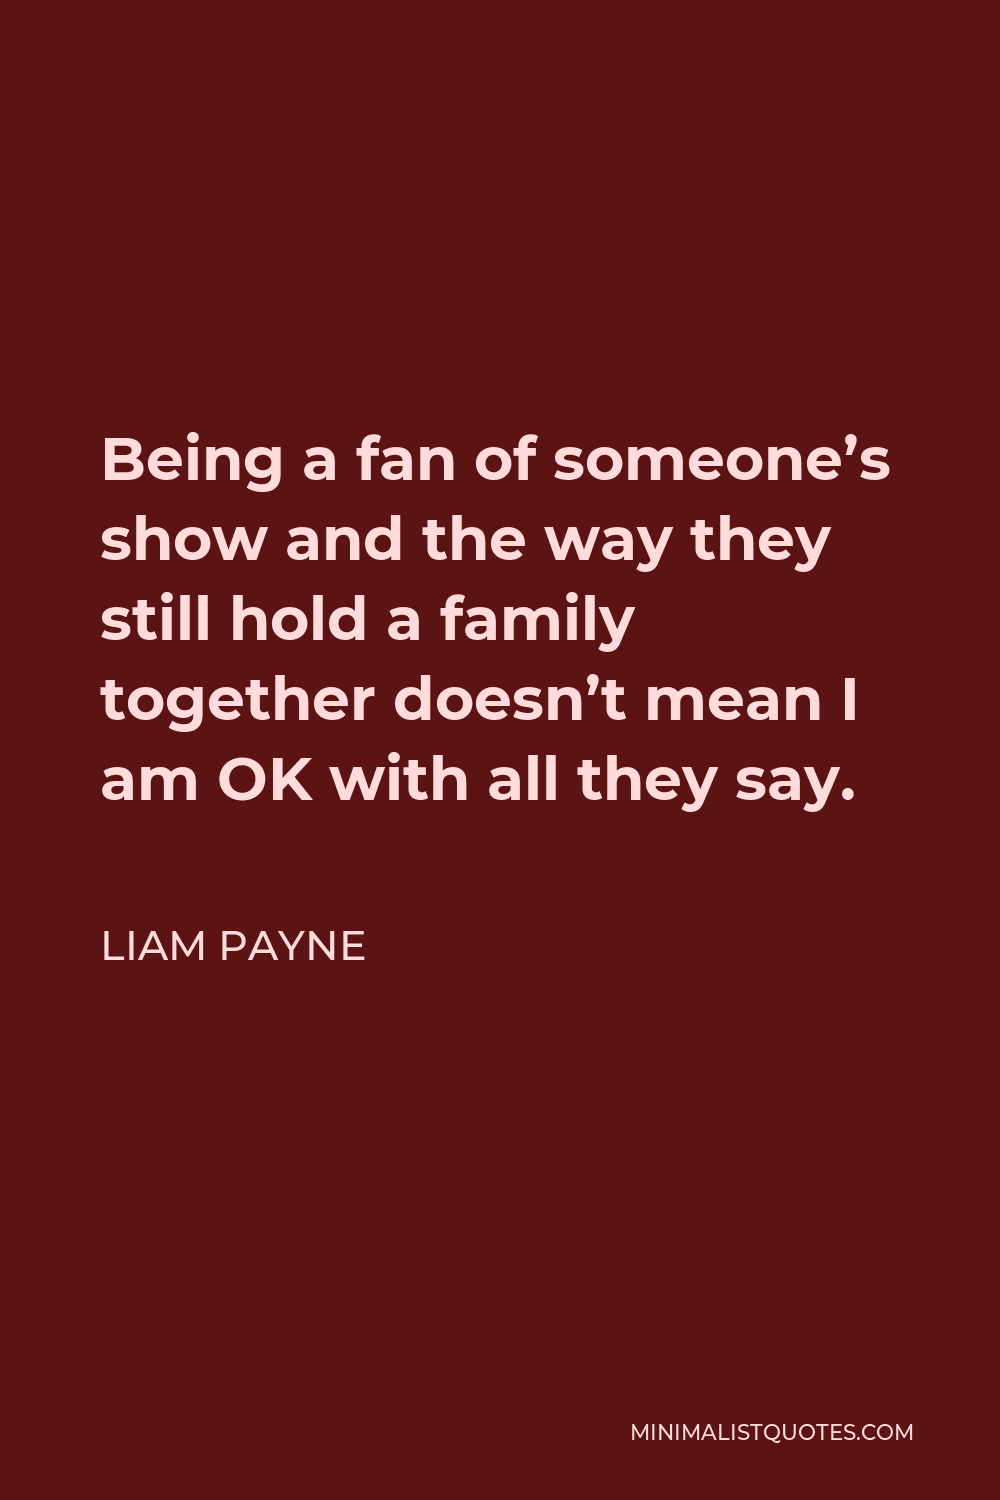 Liam Payne Quote - Being a fan of someone’s show and the way they still hold a family together doesn’t mean I am OK with all they say.